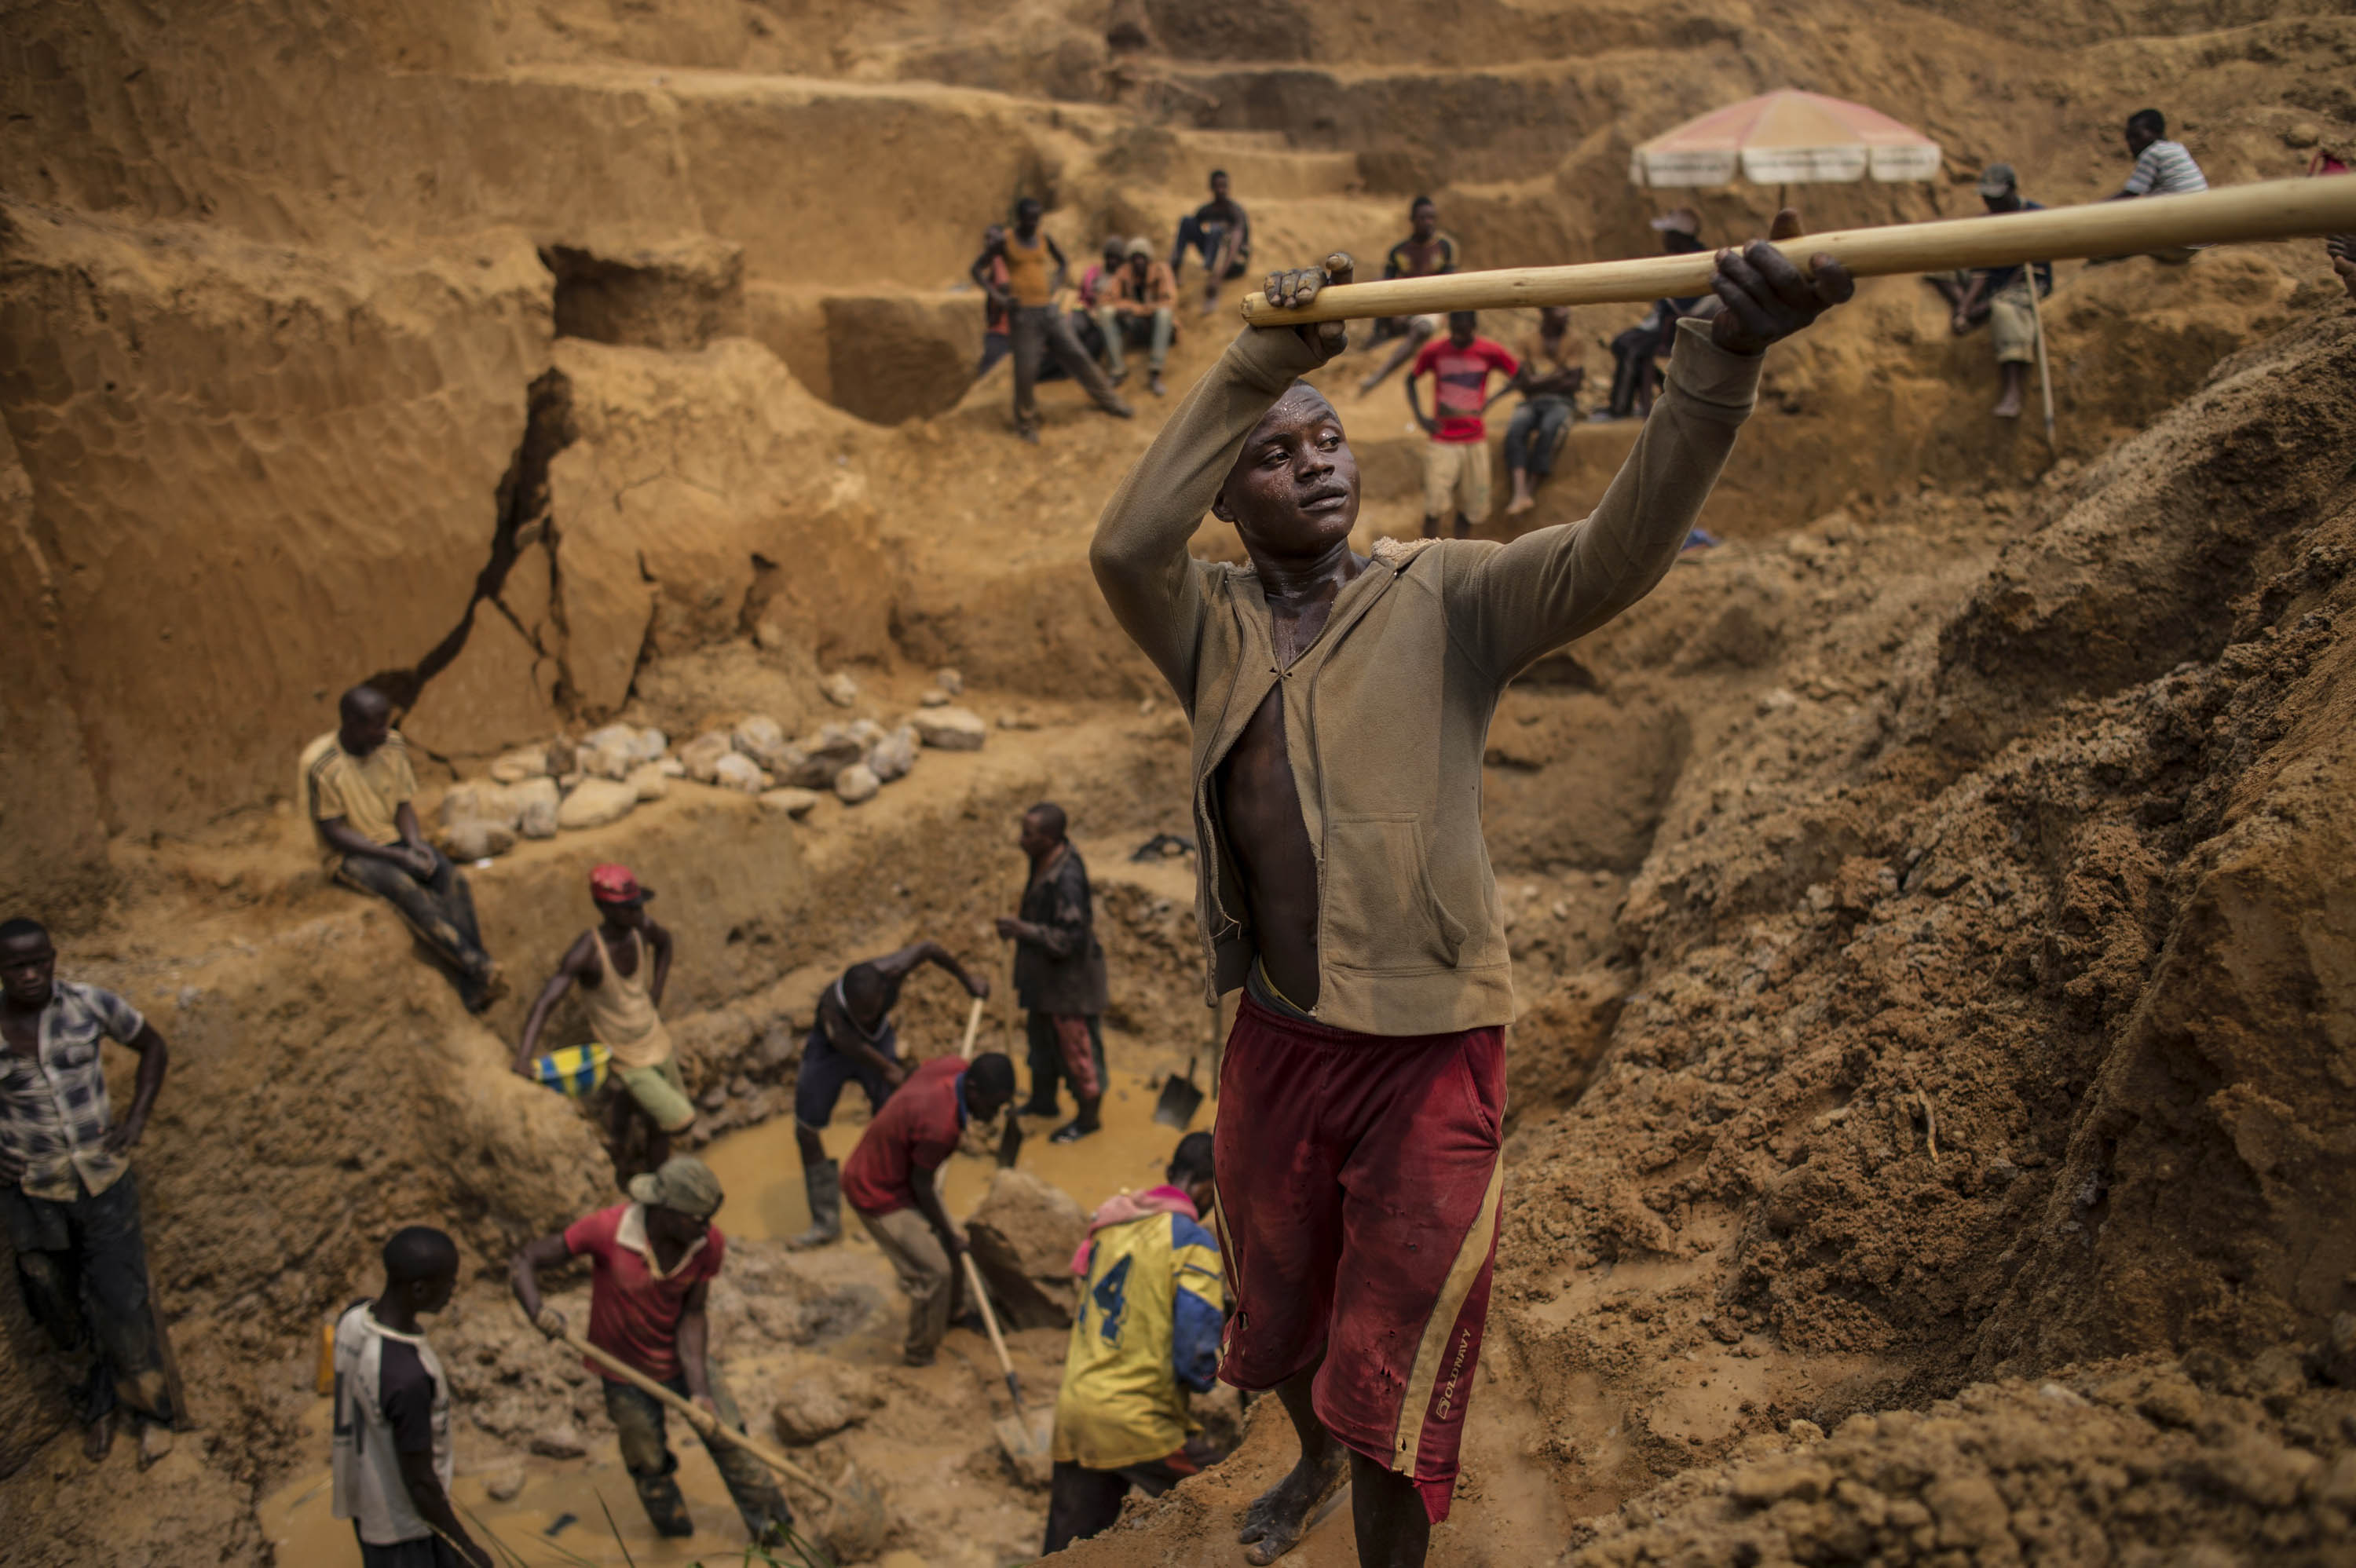 Congolese workers search for rough diamonds Kangambala mine in Lunged, in the south west region of Kasai in the Democratic Republic of Congo, the heart of the diamond mining area in the DRC, August 9, 2015.From <a href="http://time.com/4011617/inside-the-democratic-republic-of-congos-diamond-mines/">"Inside the Democratic Republic of Congo’s Diamond Mines"</a> (Lynsey Addario—Getty Images Reportage for TIME)